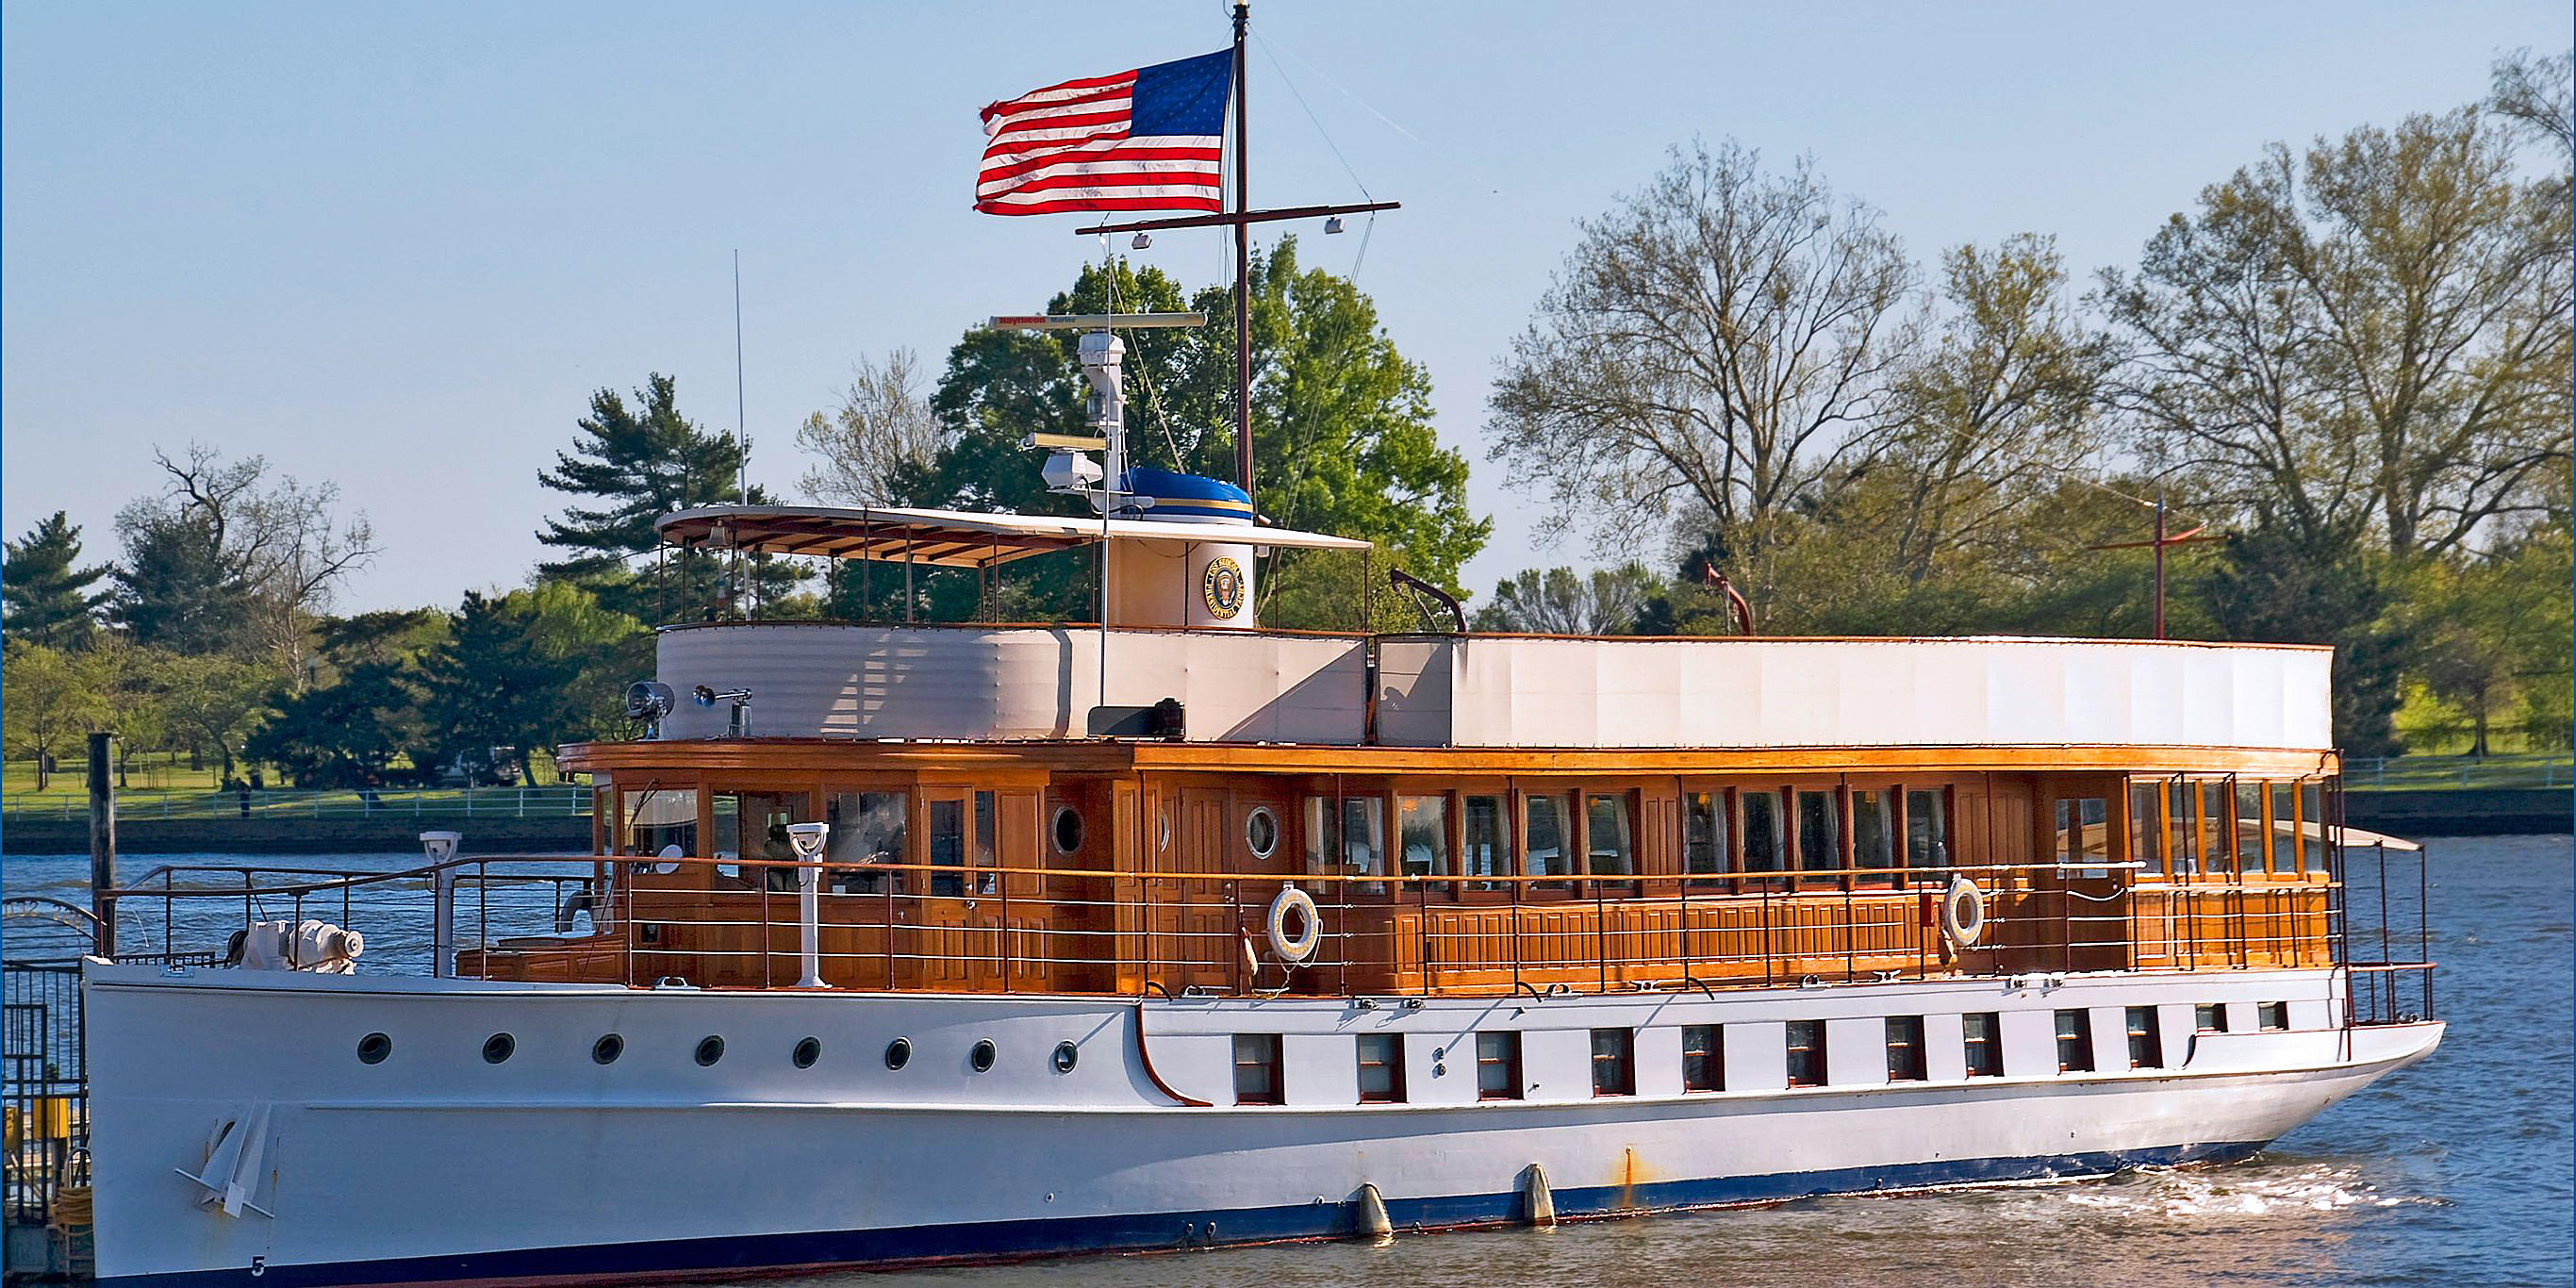 Presidential Yacht Sequoia